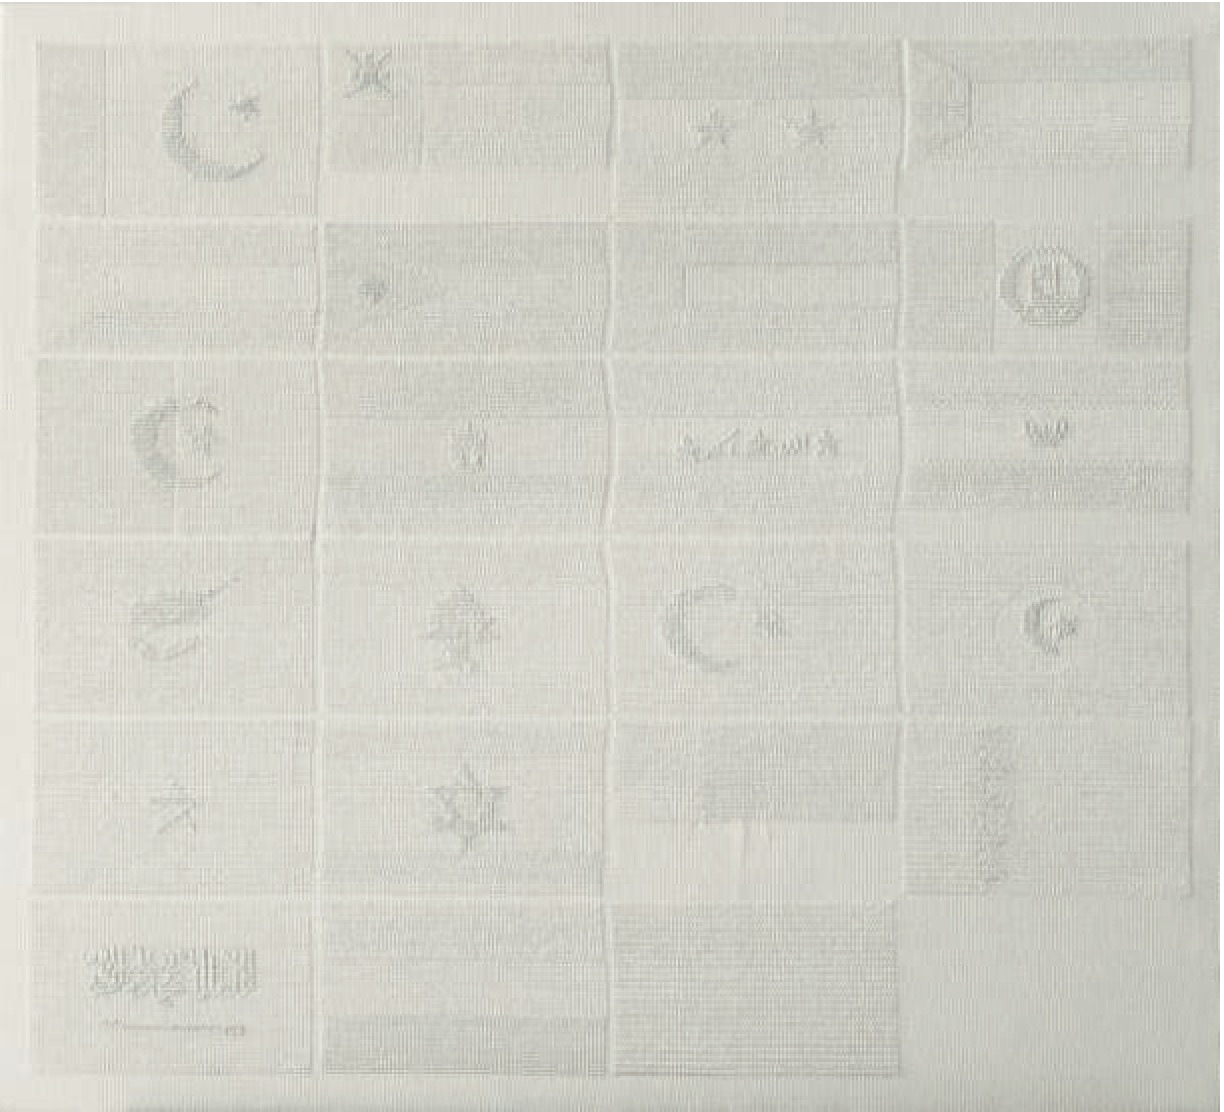 Untitled (White Flags # 1:1)-2012–13 - Cristiana de Marchi - Embroidery on canvas